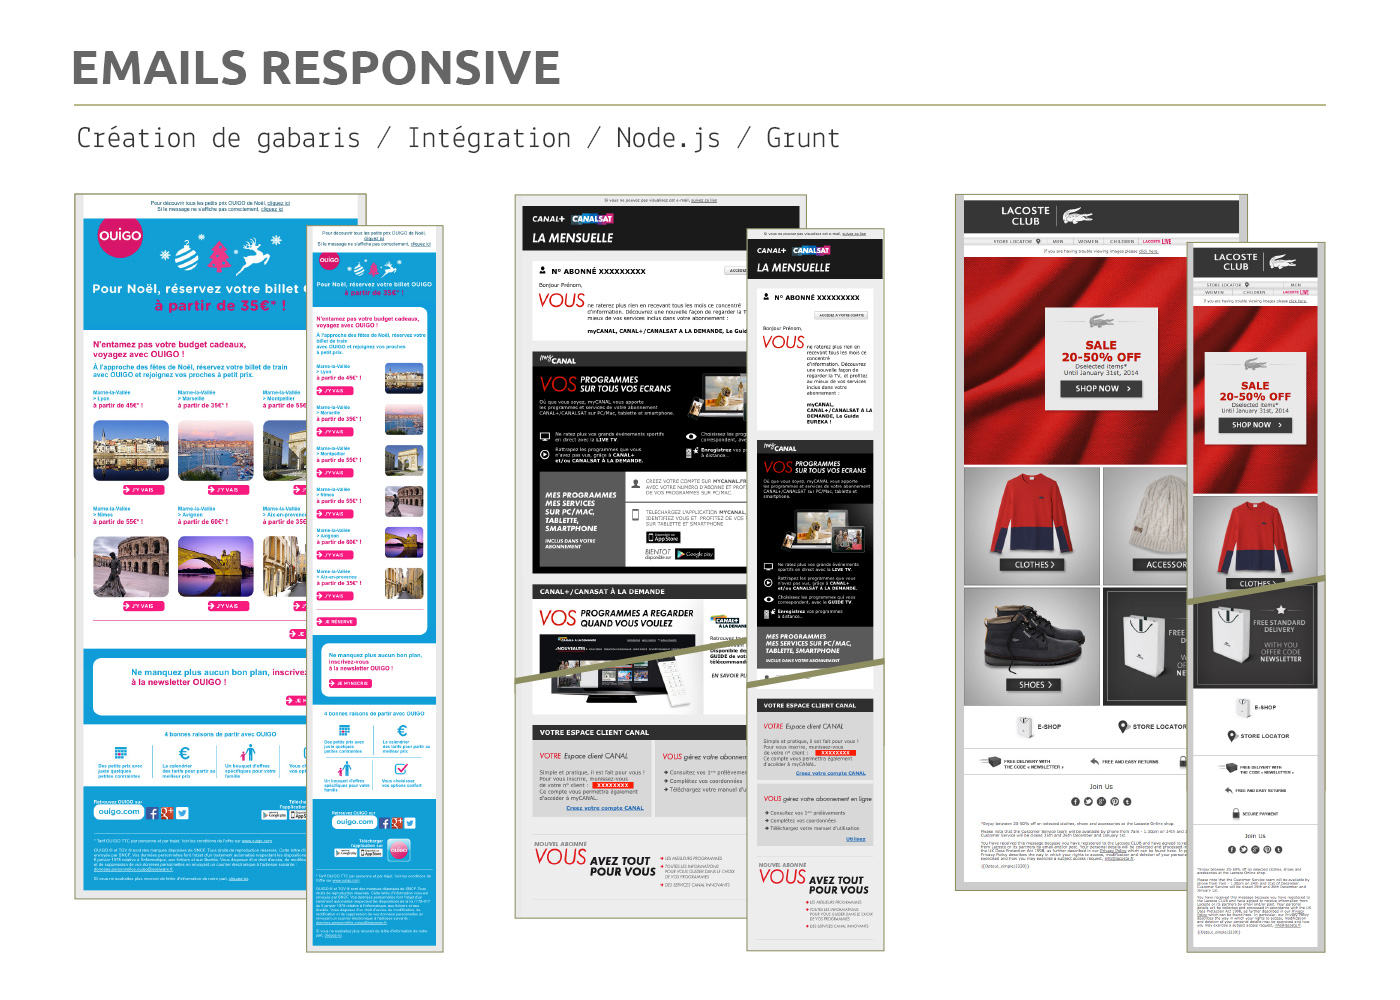 Emailing responsive